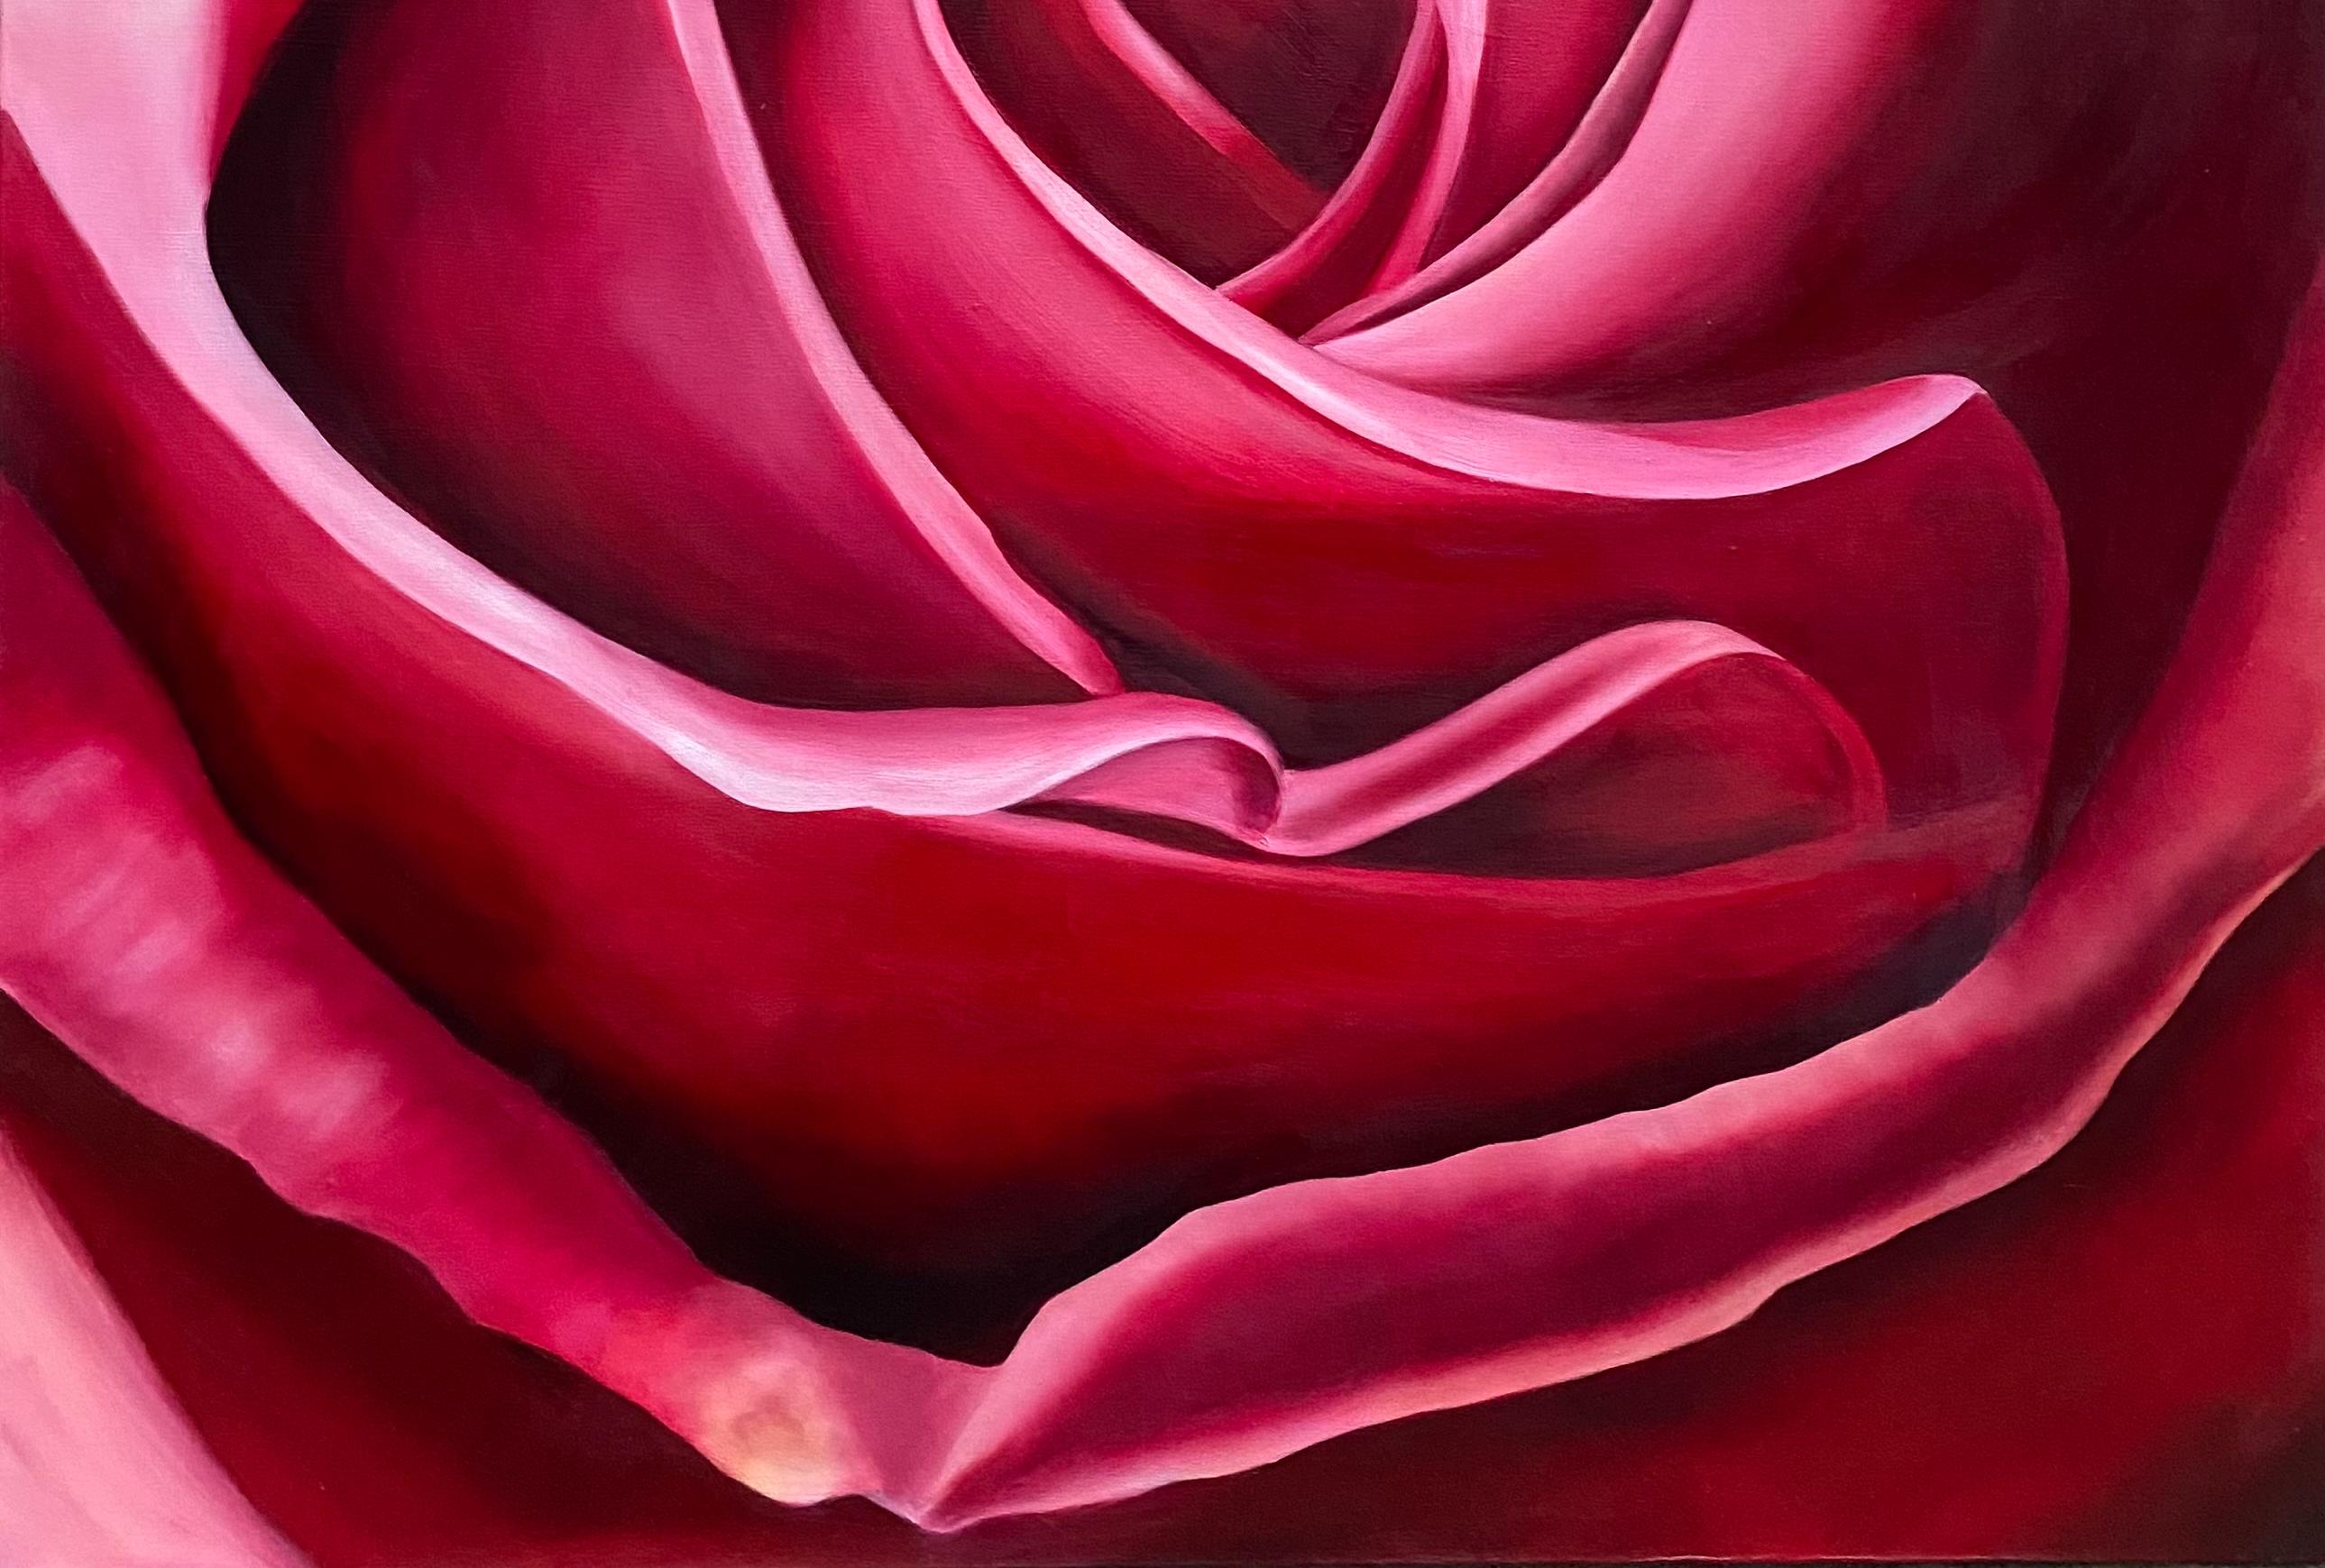 Rose  Realism Oil on Canvas    Gallery Wrapped Floral 54 x 44  Valentines - Red Still-Life Painting by Susan Meeks